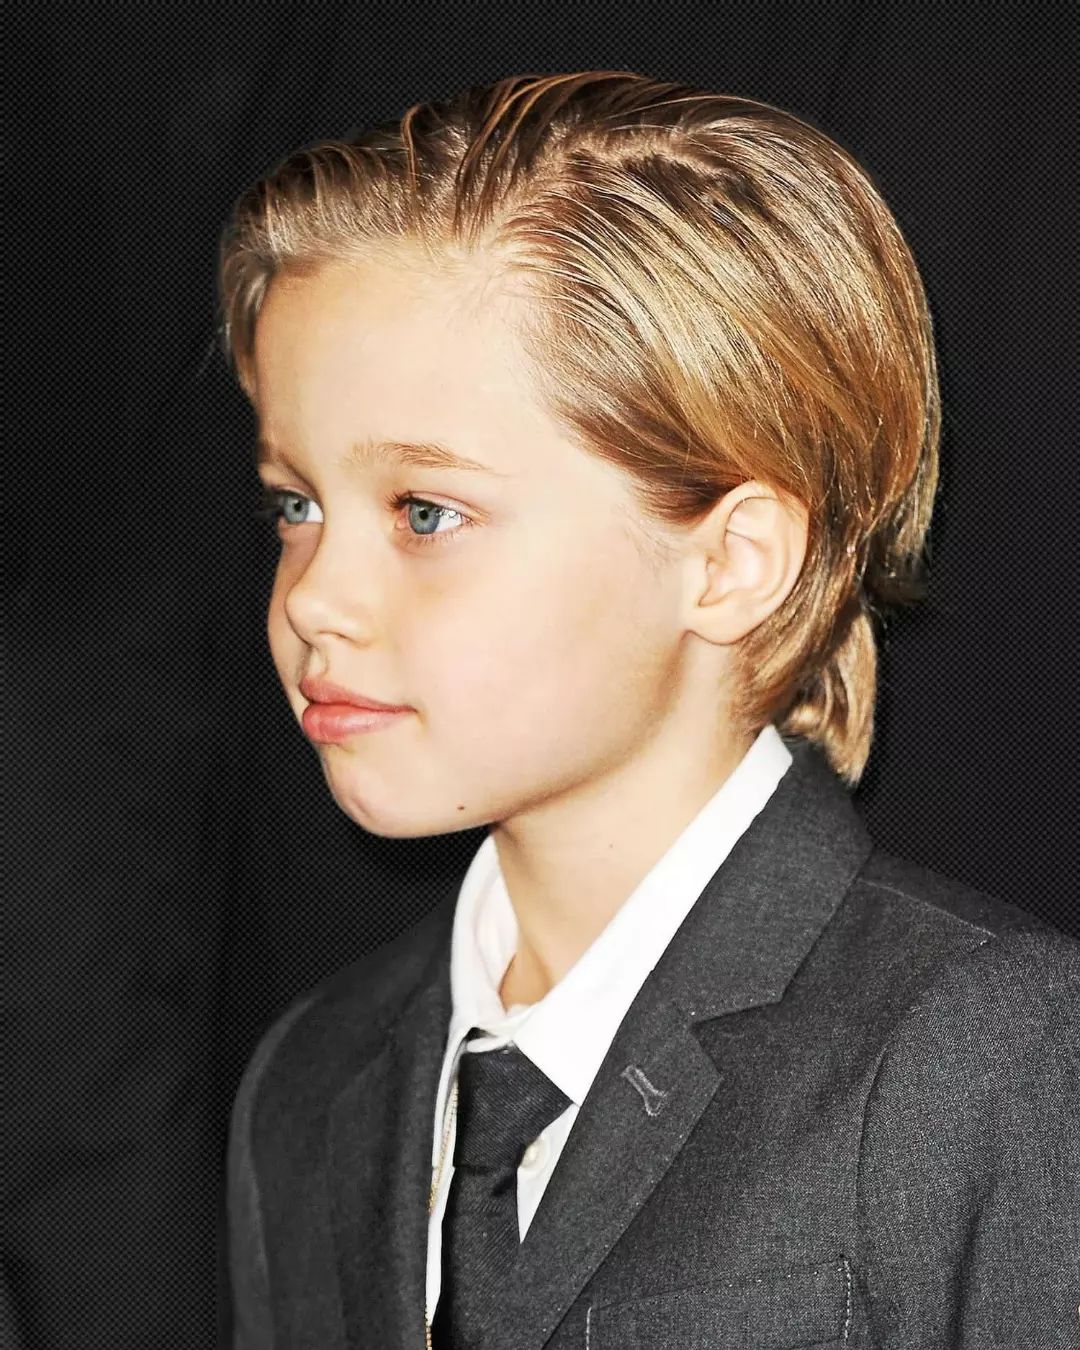 Shiloh Jolie-Pitt often sported short hair and suits when she was young. 